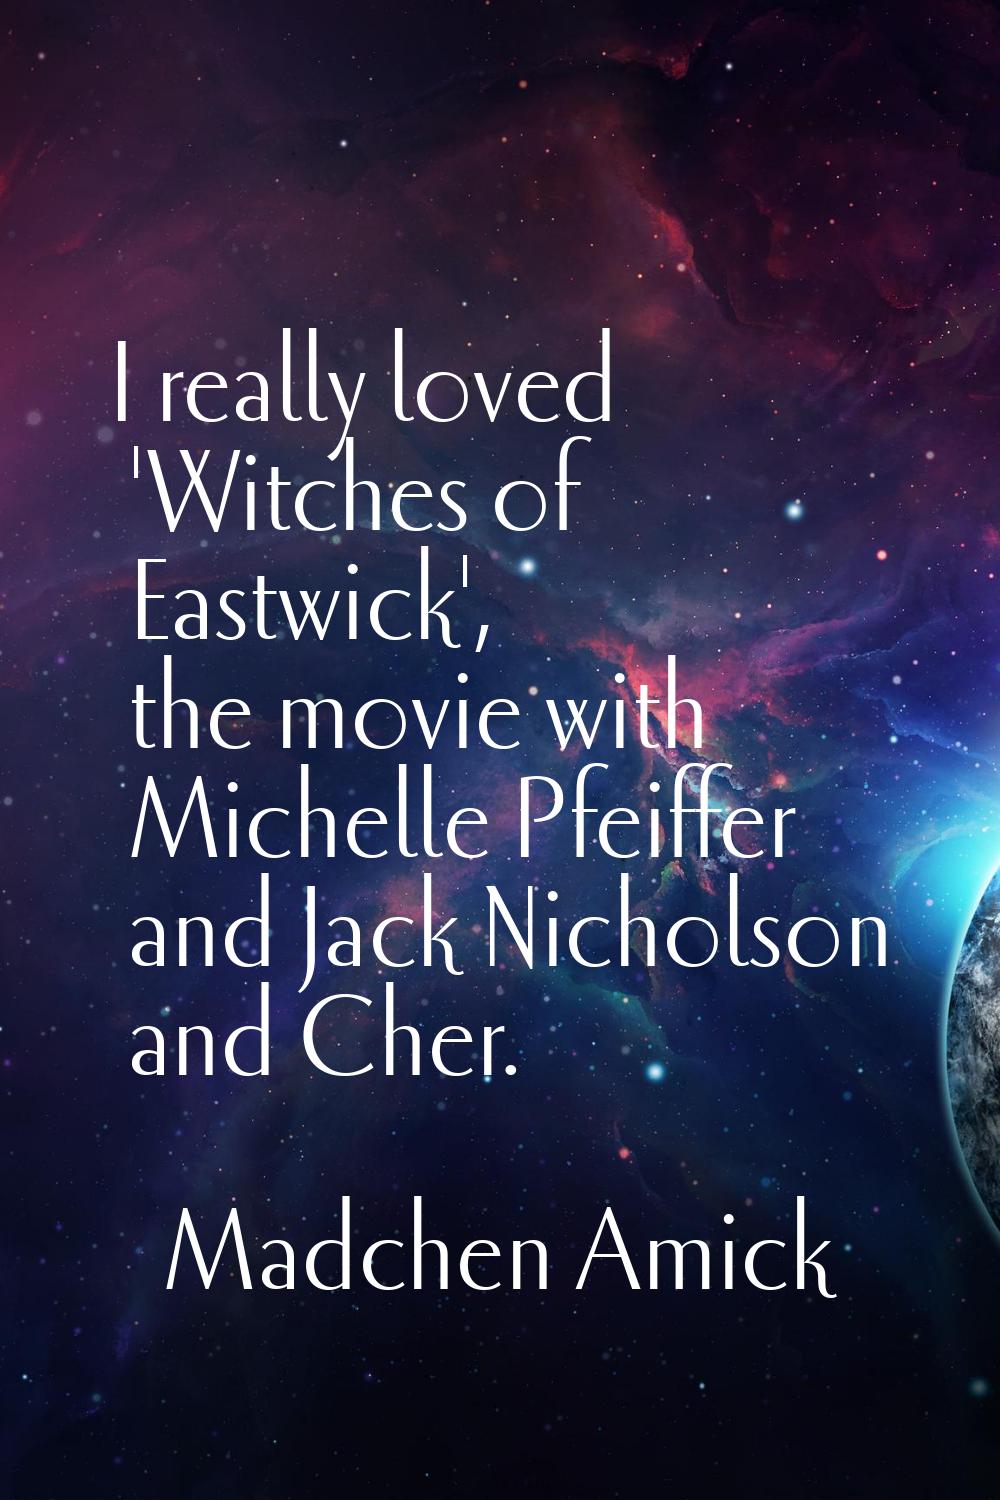 I really loved 'Witches of Eastwick', the movie with Michelle Pfeiffer and Jack Nicholson and Cher.